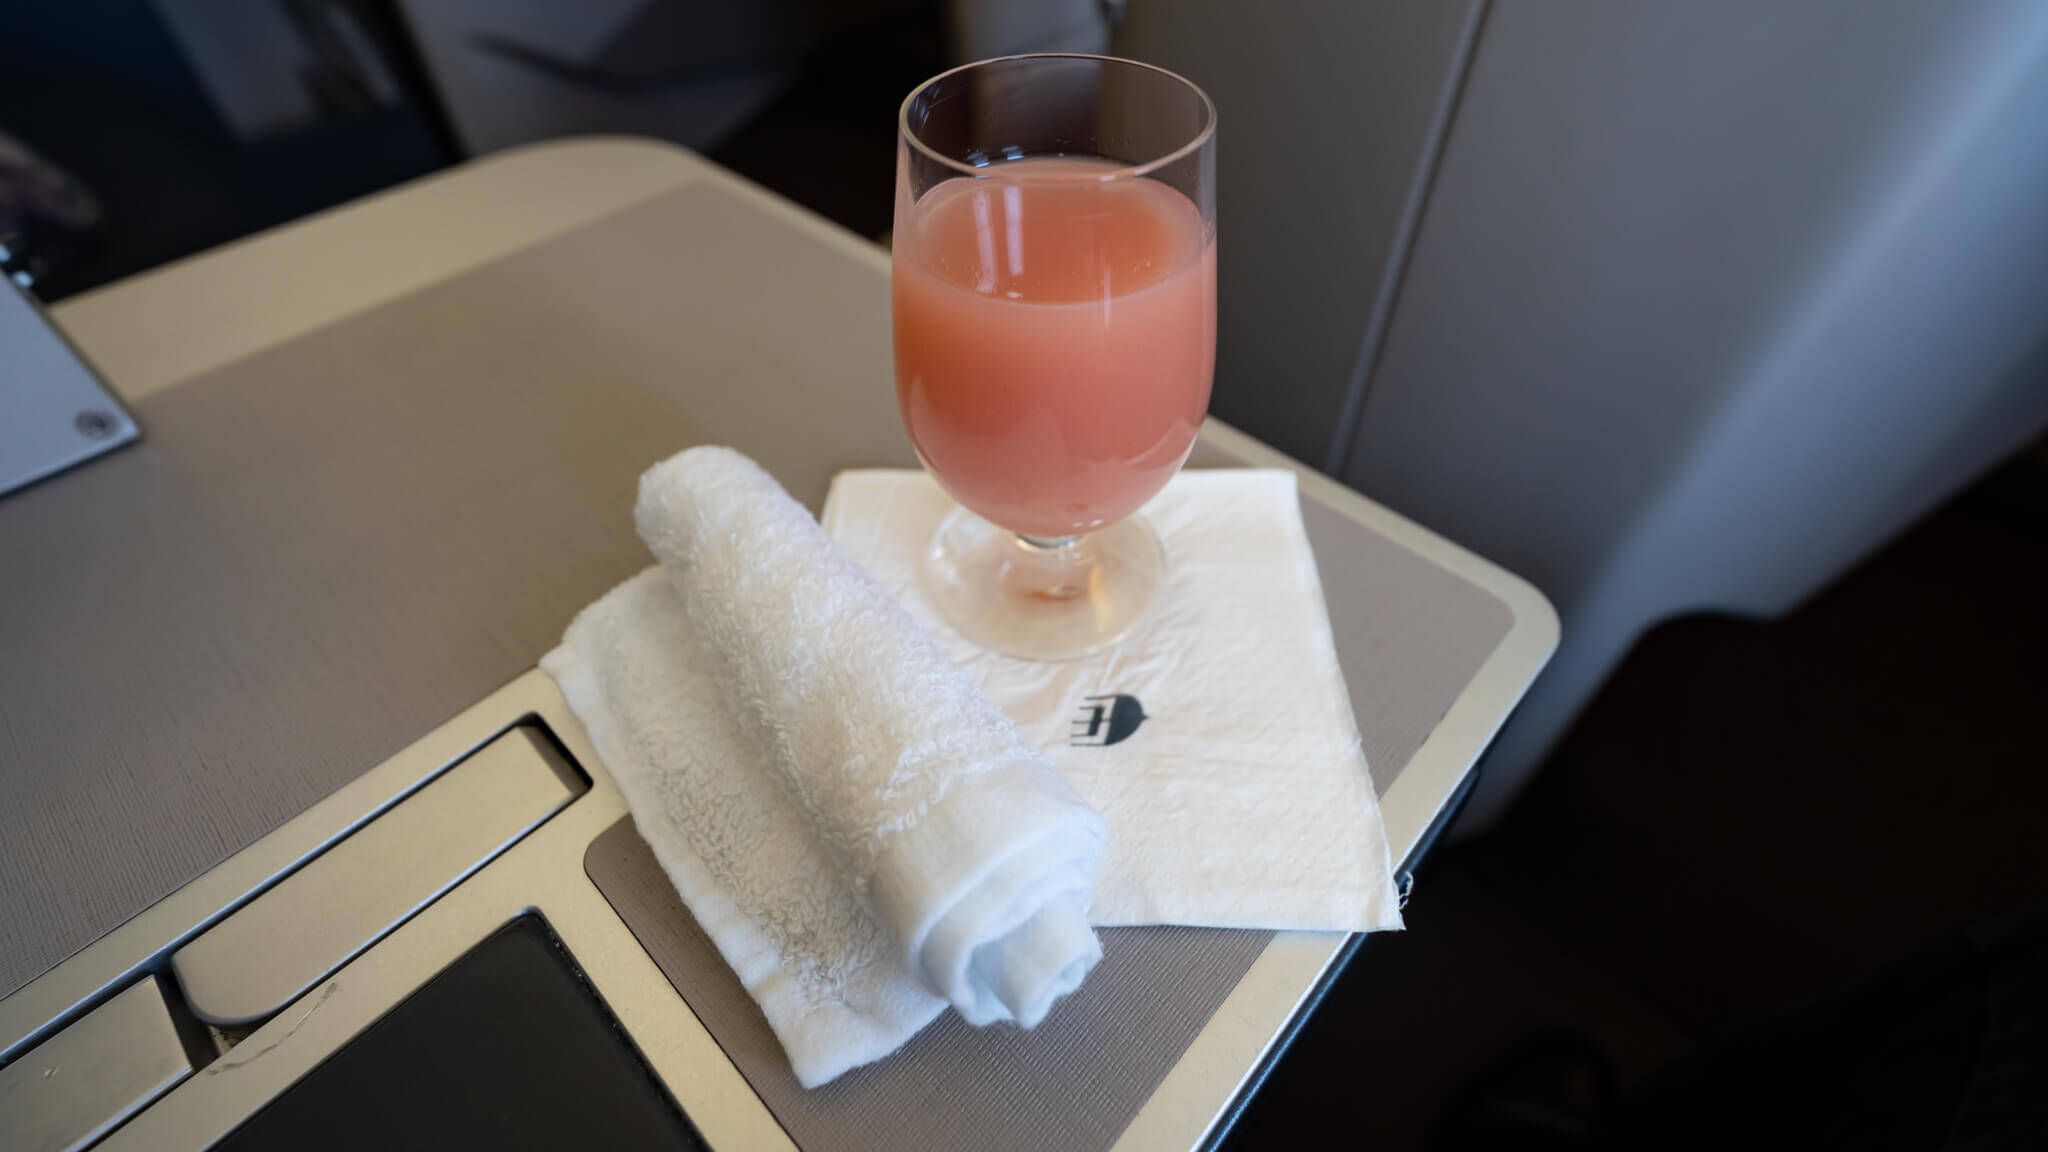 a glass of pink liquid on a white towel on a laptop